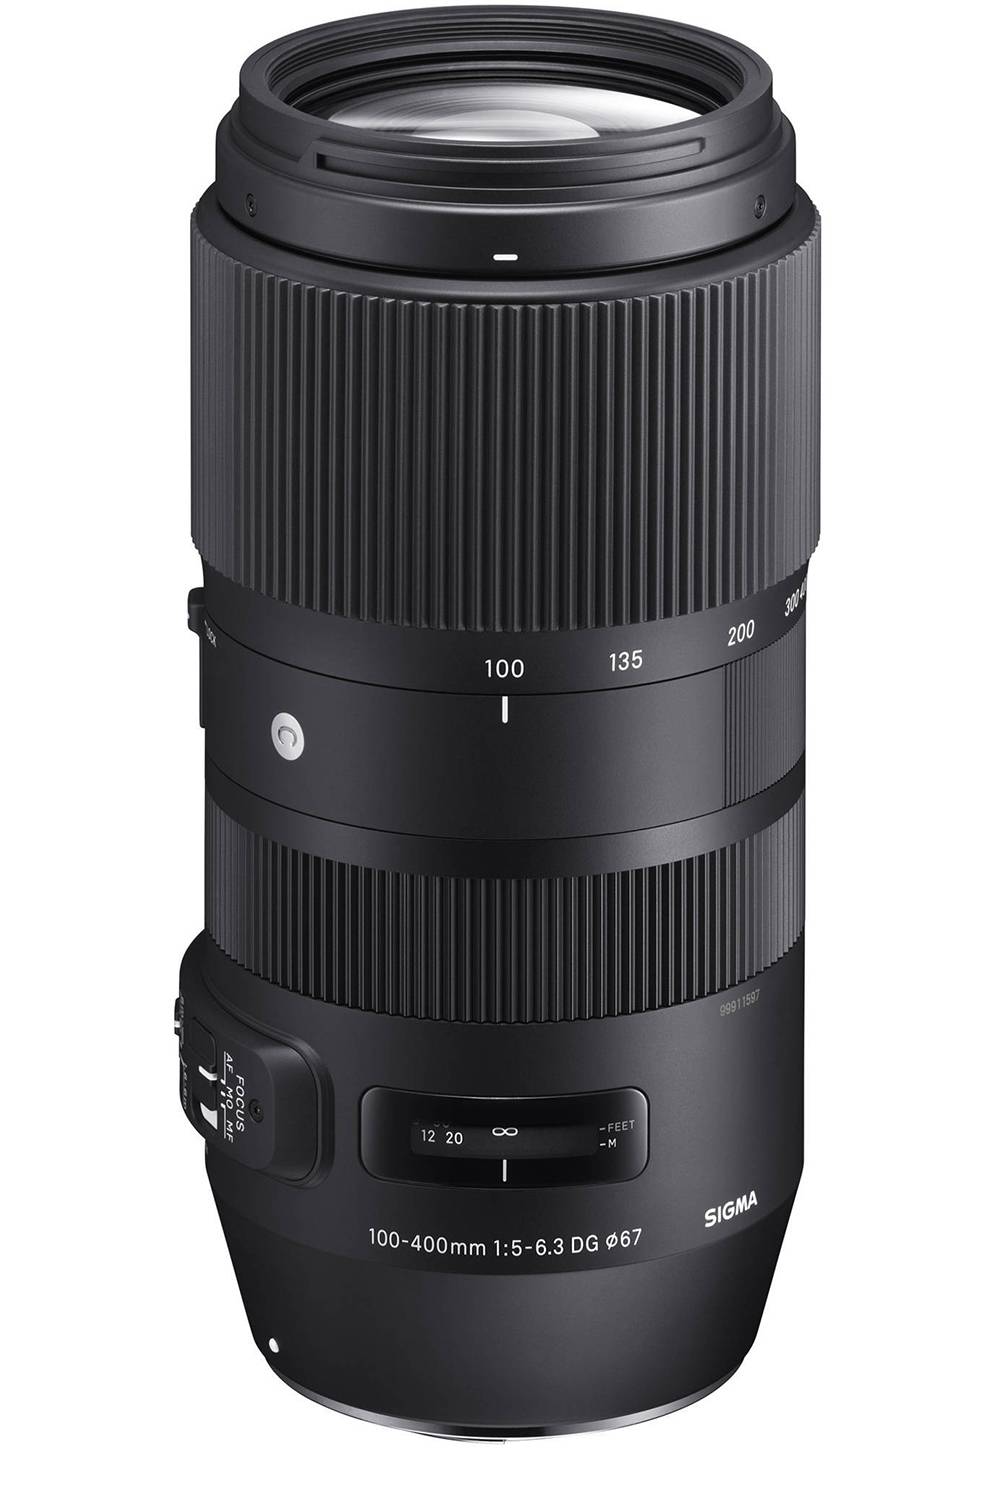 Sigma 100-400mm f/5-6.3 Contemporary DG OS HSM Lens for Canon